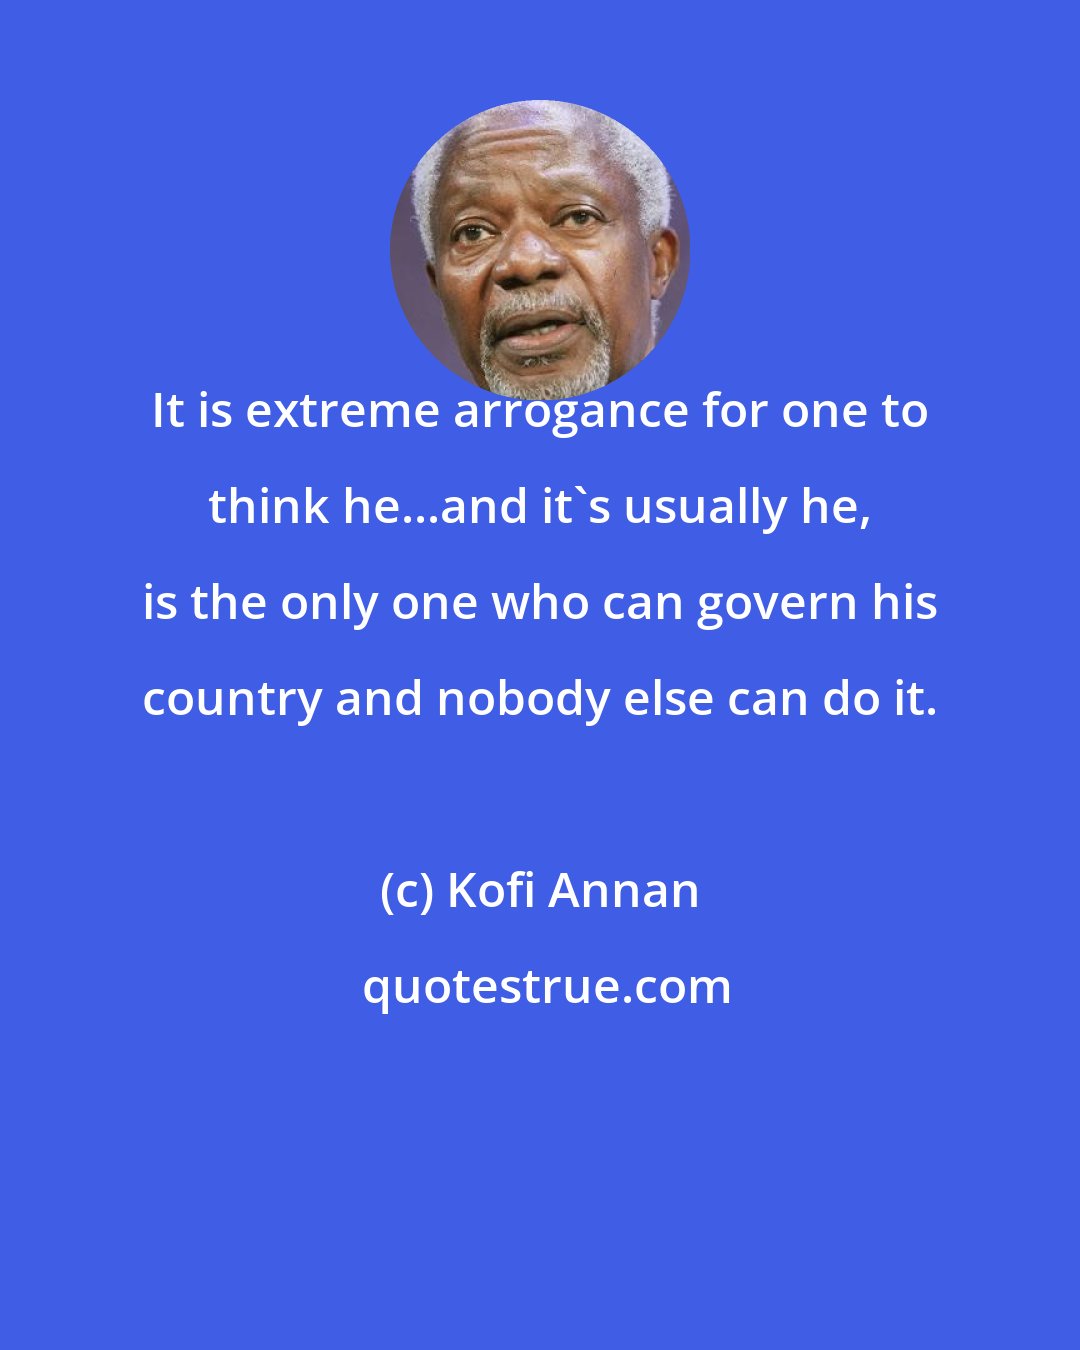 Kofi Annan: It is extreme arrogance for one to think he...and it's usually he, is the only one who can govern his country and nobody else can do it.